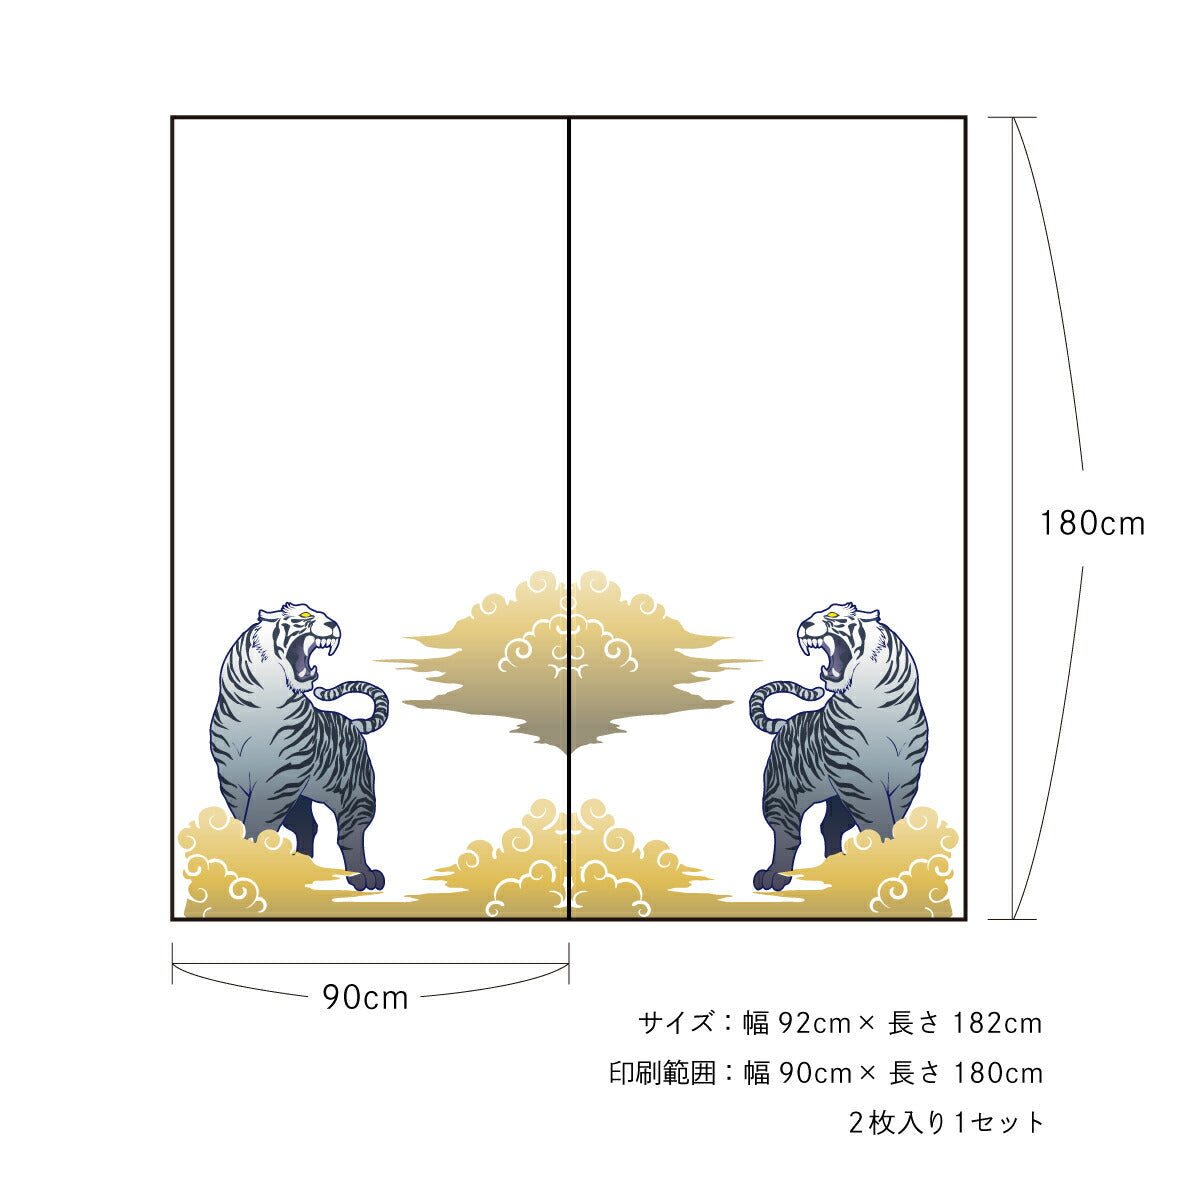 Animal design sliding door paper Tiger scroll tiger_03F Double cloud white tiger 92cm x 182cm 2 sheets included Glue type Asahipen Year of the Tiger Zodiac White Tiger Tiger Stylish Unique Western style Japanese pattern Art Design Modern